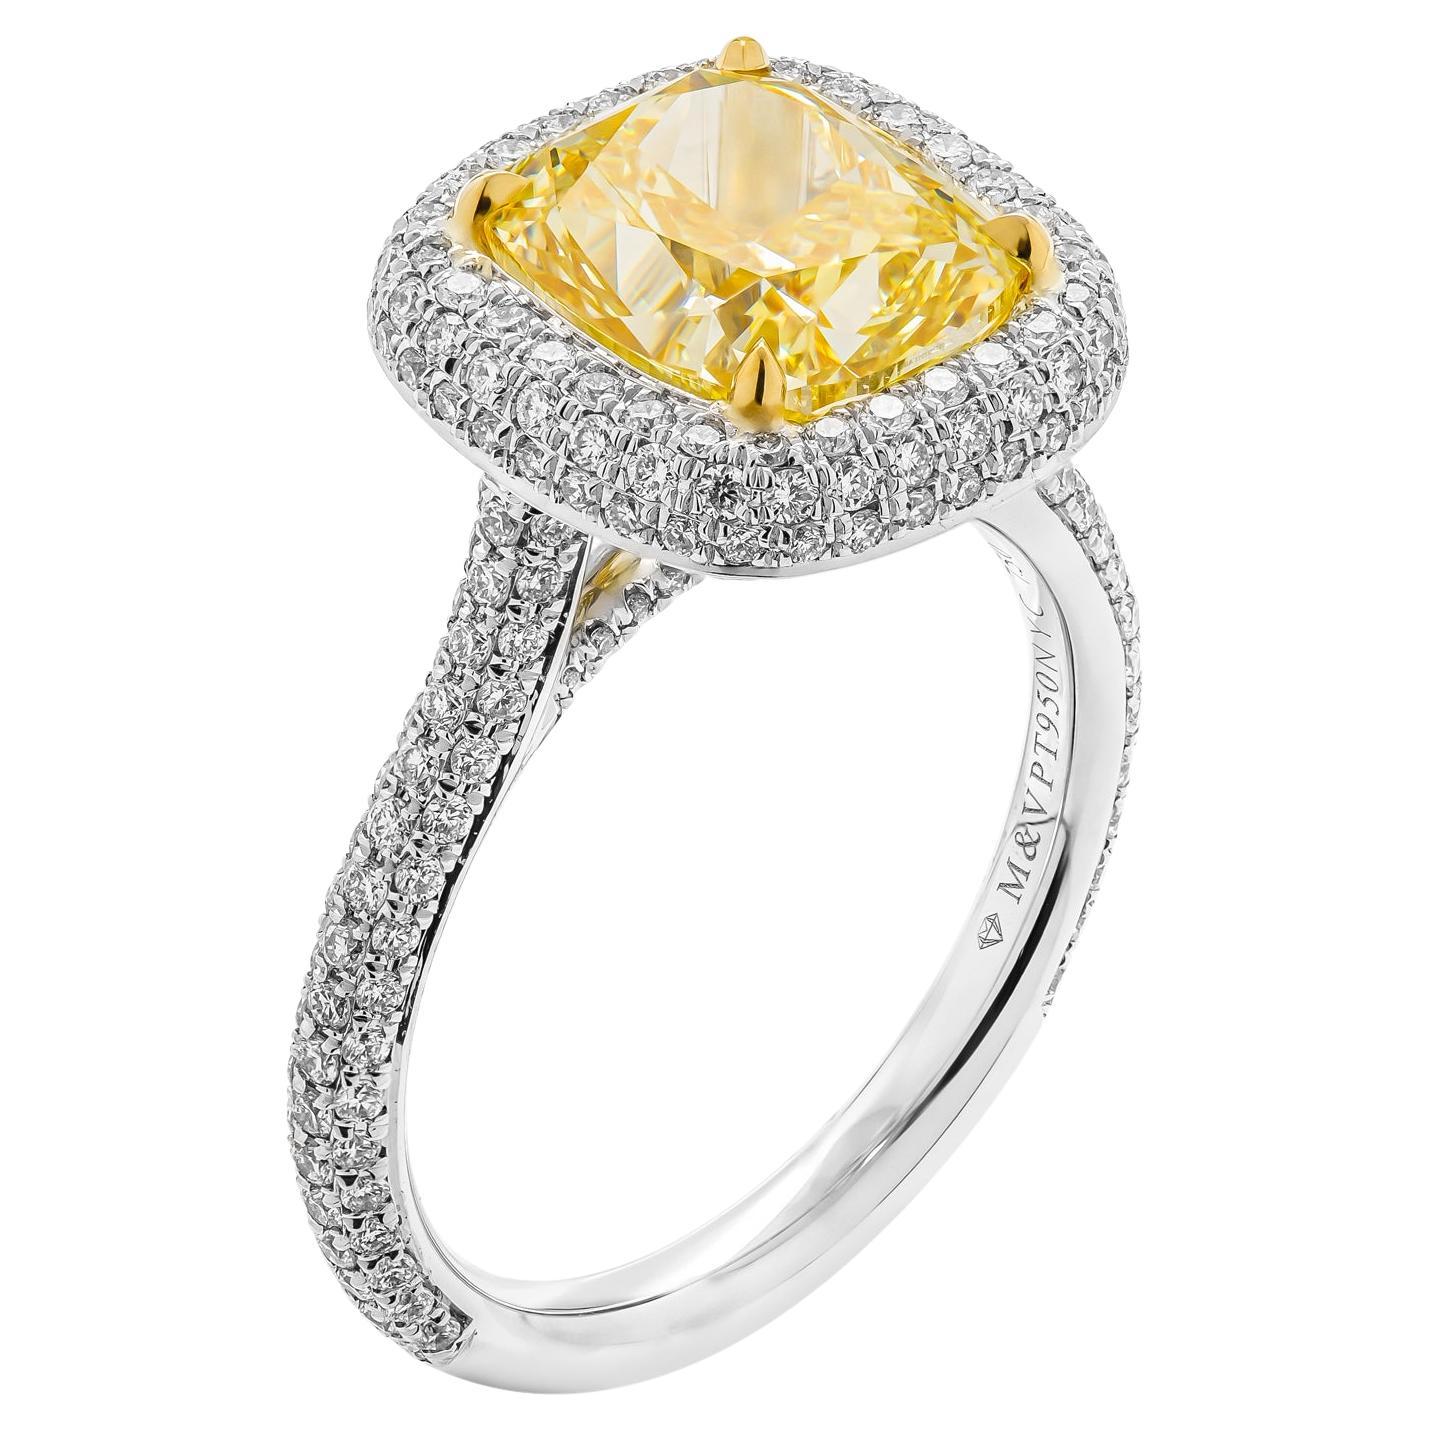 GIA Certified 3.53 Carat Natural Fancy Yellow Cushion Diamond Engagement Ring For Sale